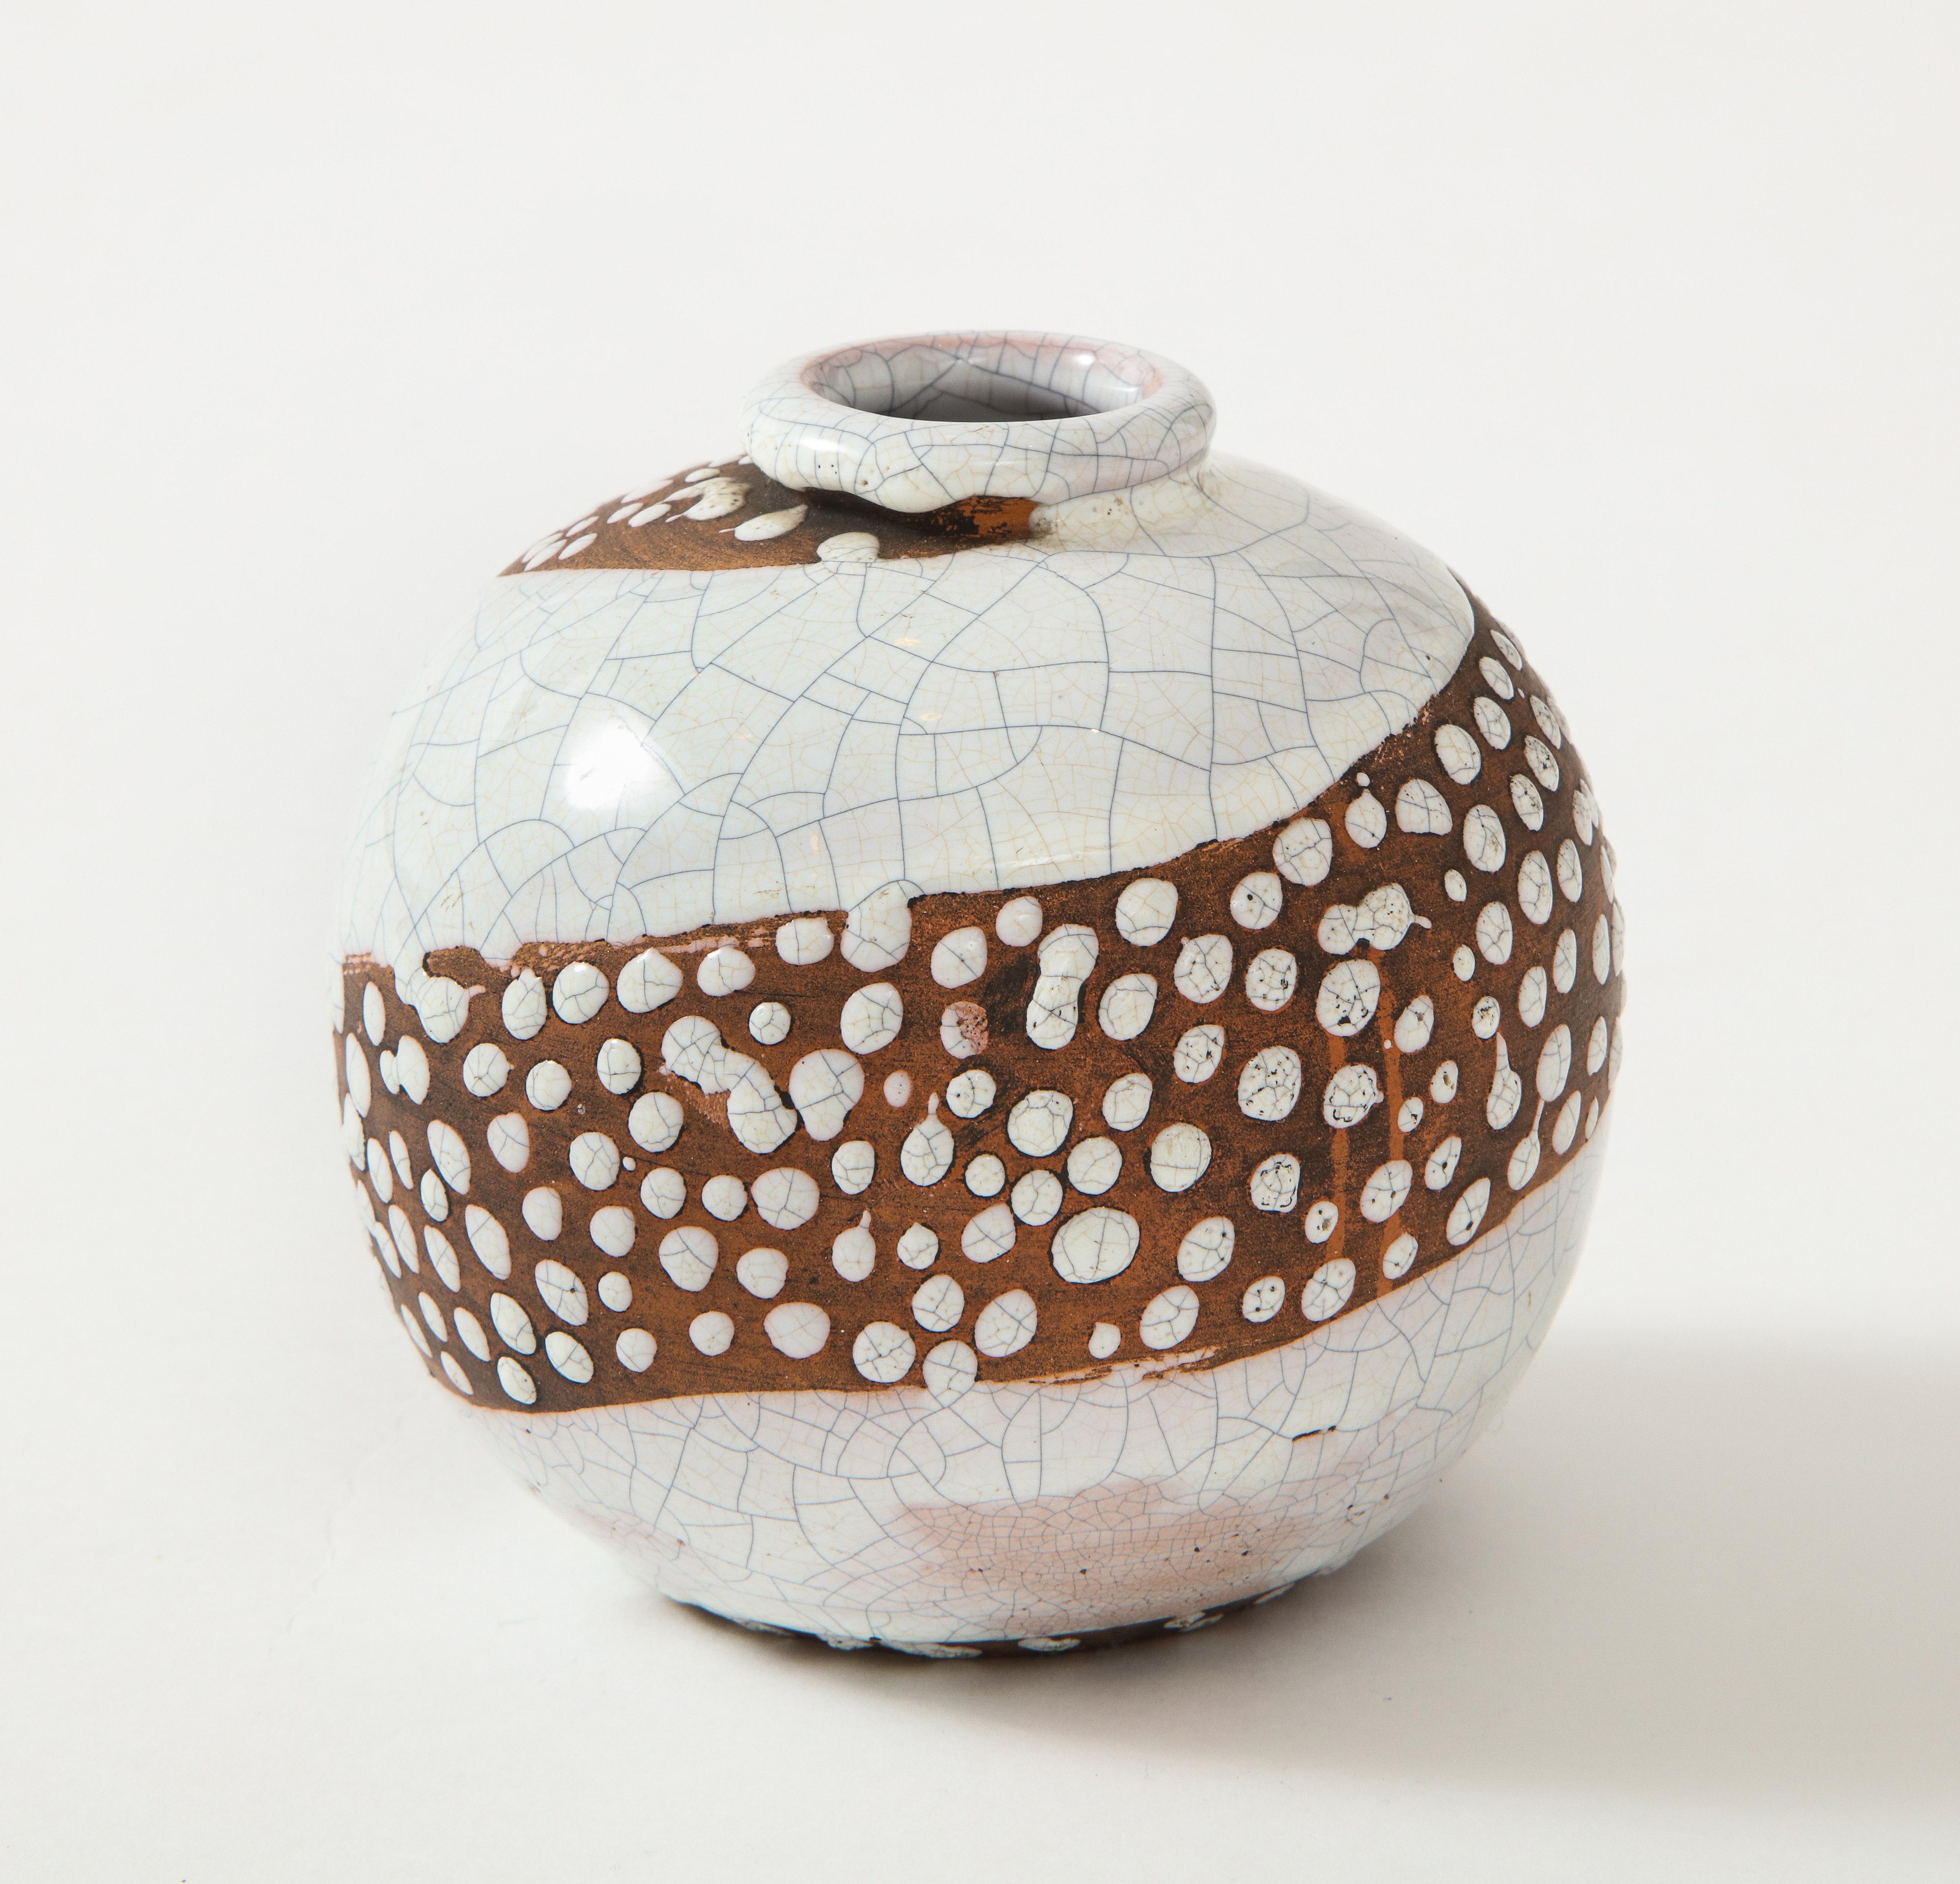 Felix Gete small Art Deco sphere shaped vase, C. A. B., France, circa 1930
Small brown & off-white sphere shaped Art Deco vase by Felix Gete, C. A. B. Bordeaux Art Ceramics, France, circa 1930, marked/numbered
Ceramic
Measures: Height 4.5,